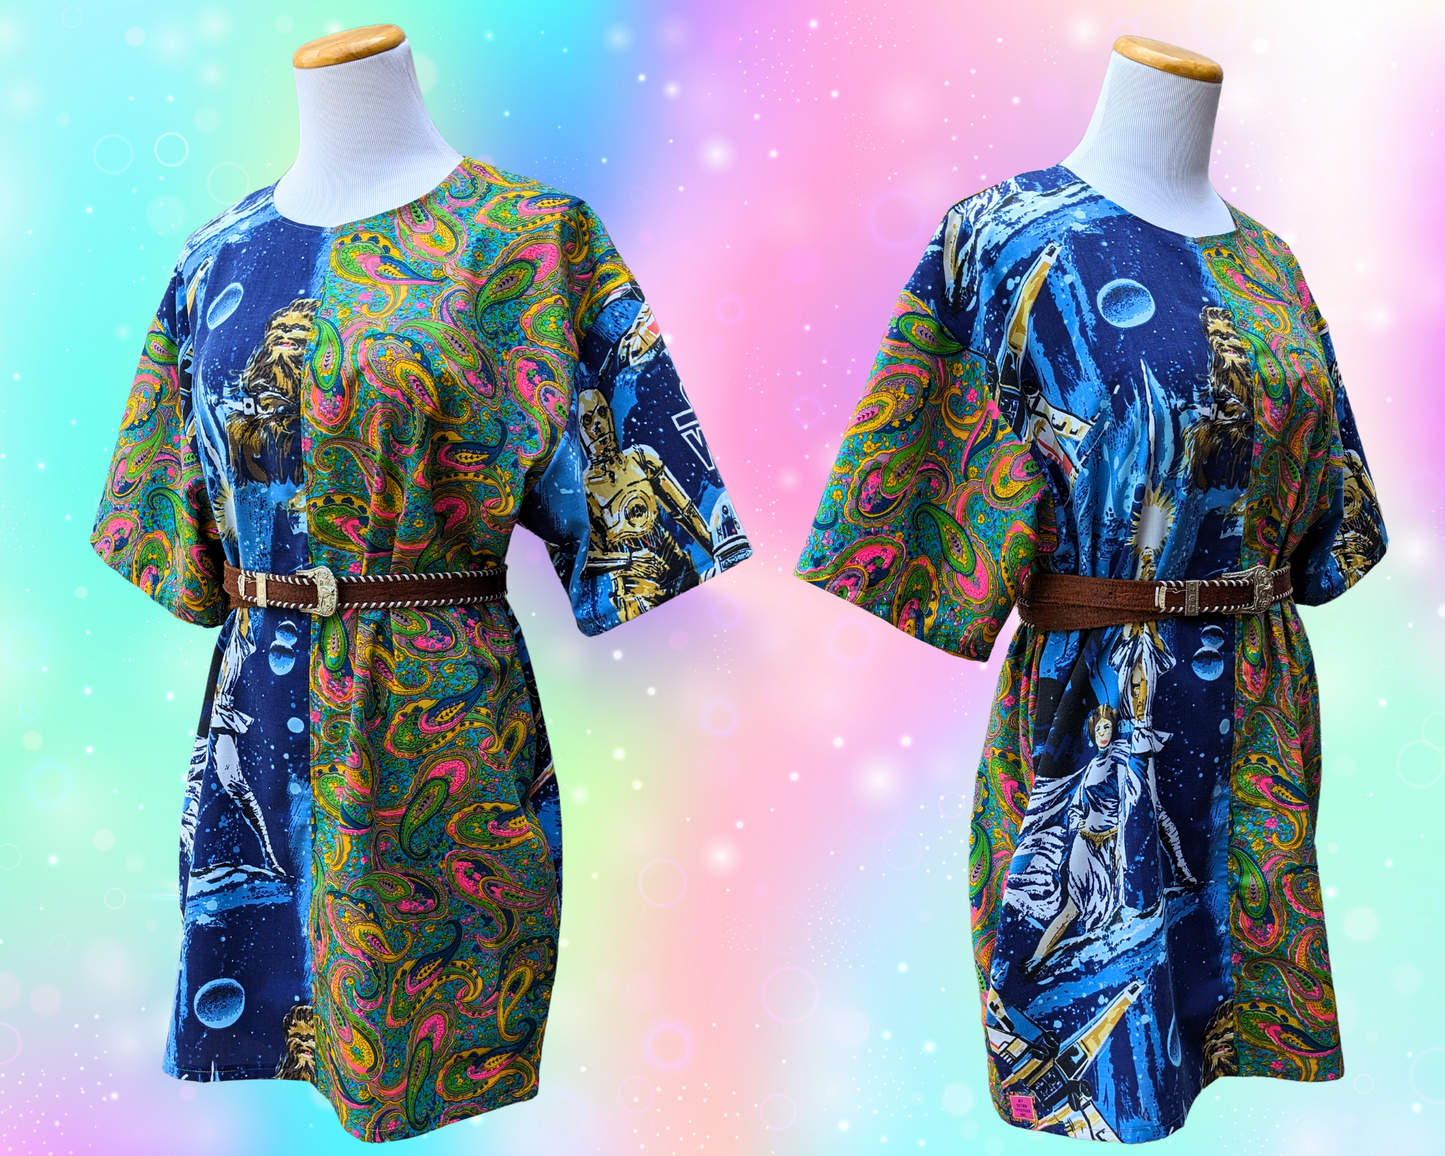 Handmade, Upcycled Star Ward Bedsheet + Groovy 1960's Fabric T-Shirt Dress Fits S-M